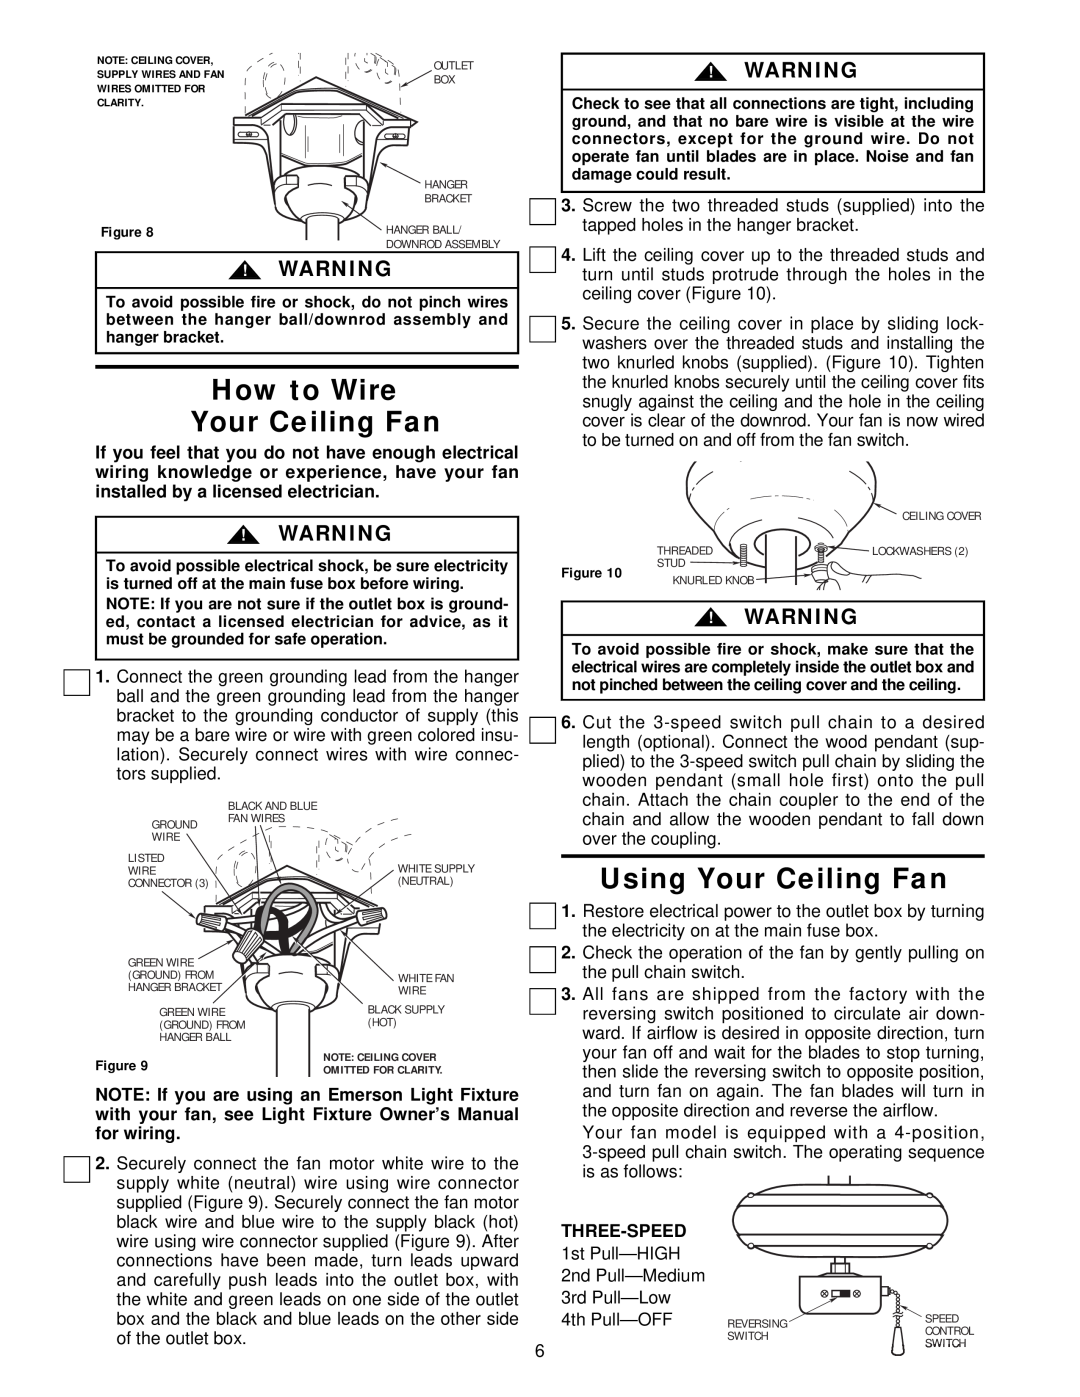 Emerson CF796CW0, CF796HGMO0, CF796MP0 warranty How to Wire Your Ceiling Fan, Using Your Ceiling Fan, Three-Speed 